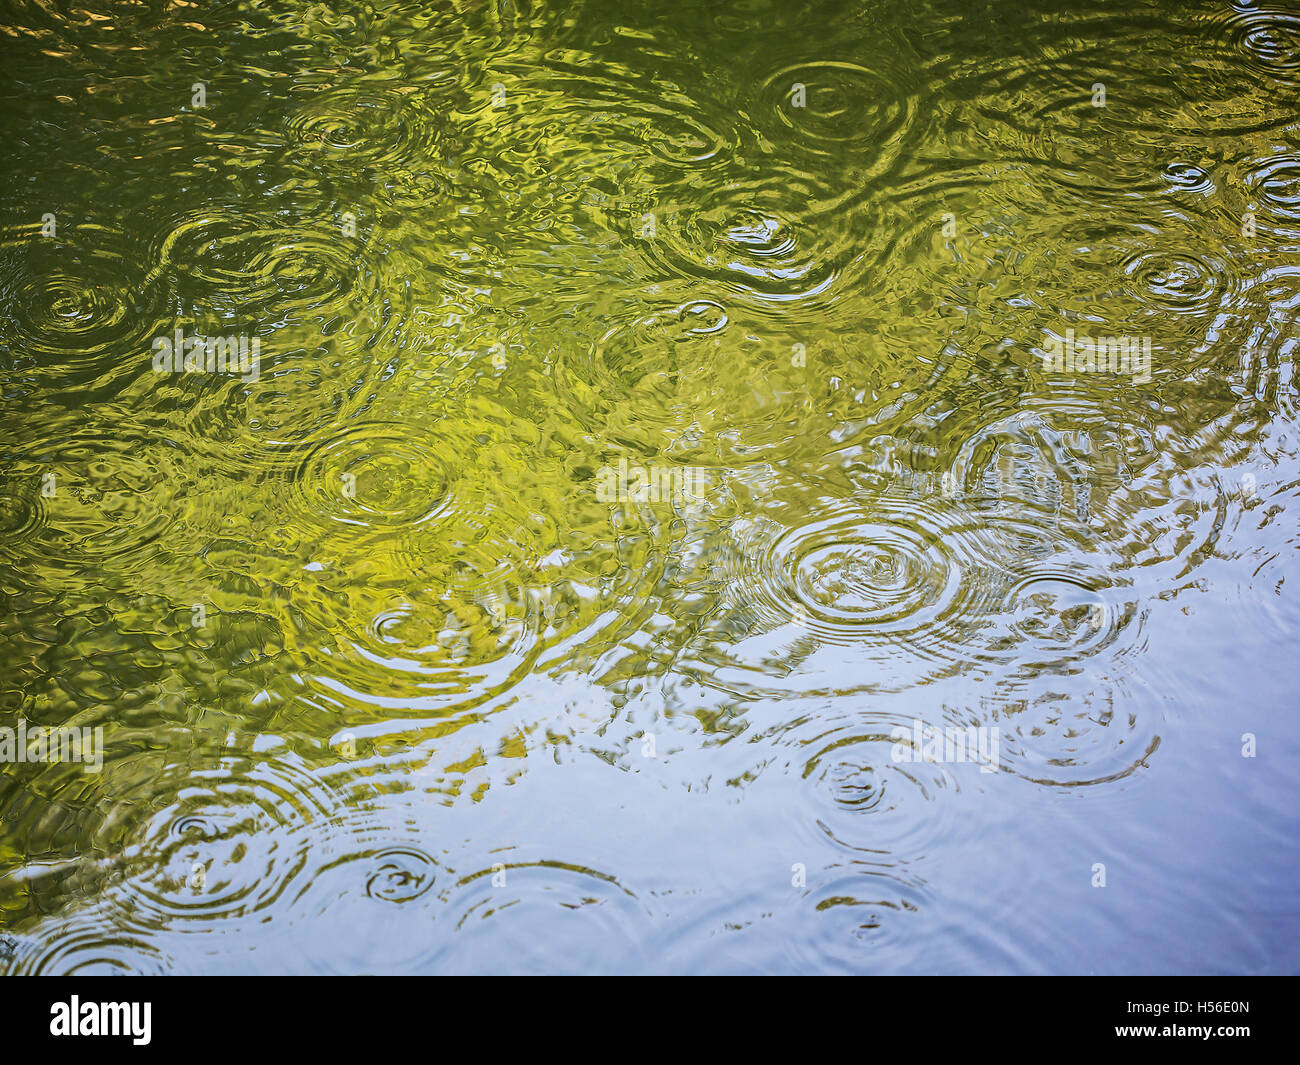 Natural water ripple effect made in a pond. Stock Photo